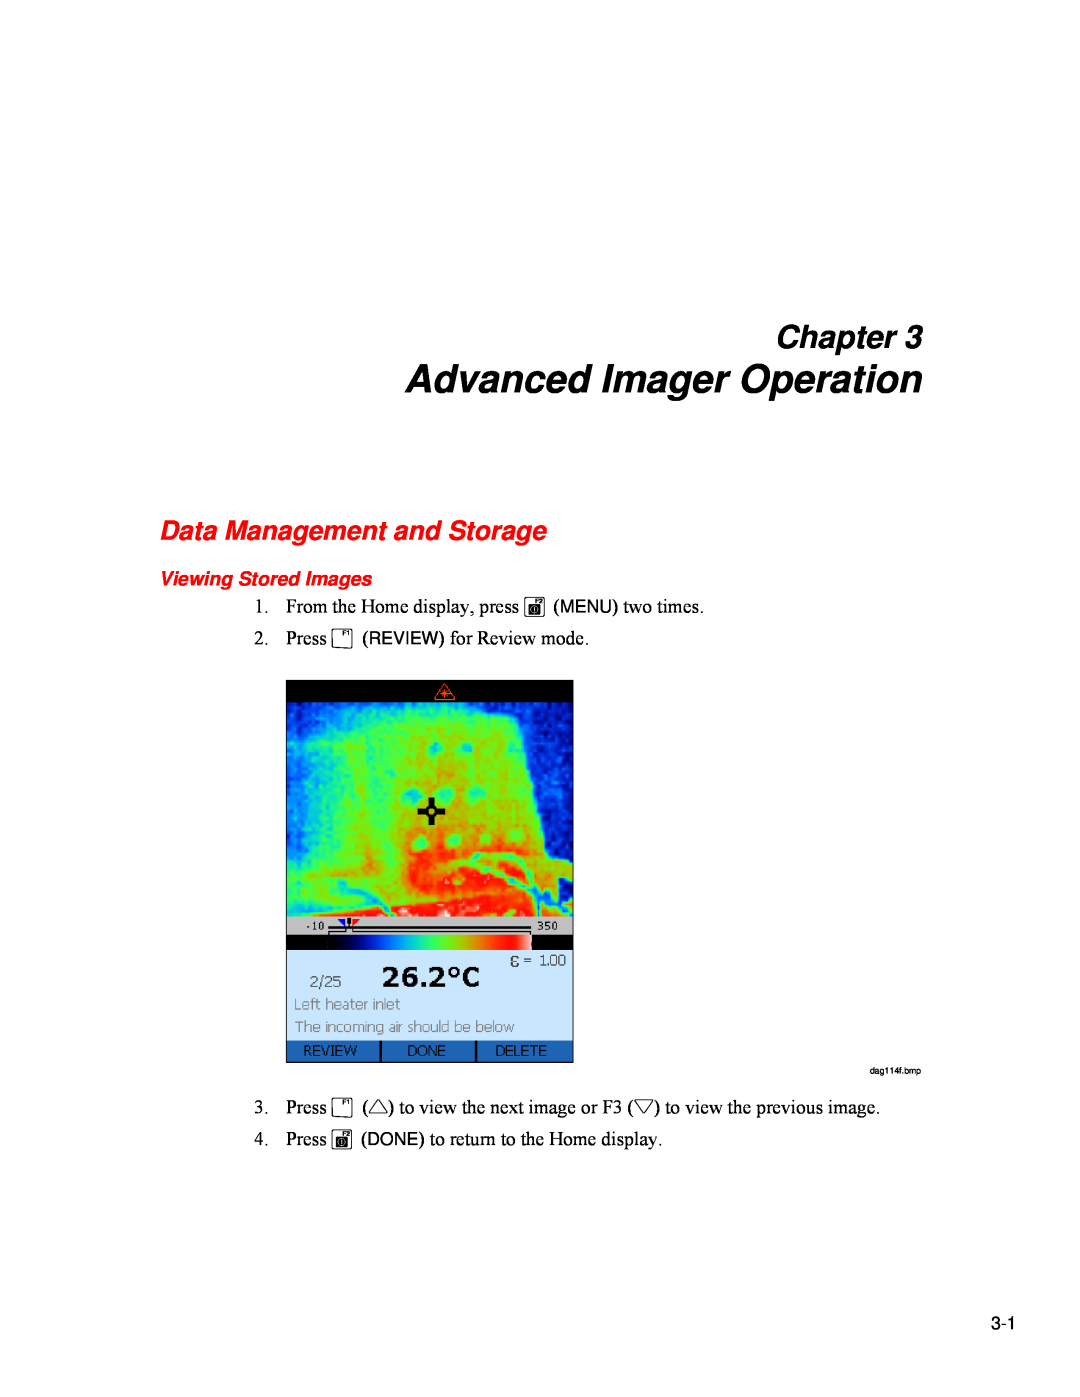 Fluke Ti20 user manual Advanced Imager Operation, Data Management and Storage, Viewing Stored Images, Chapter, dag114f.bmp 